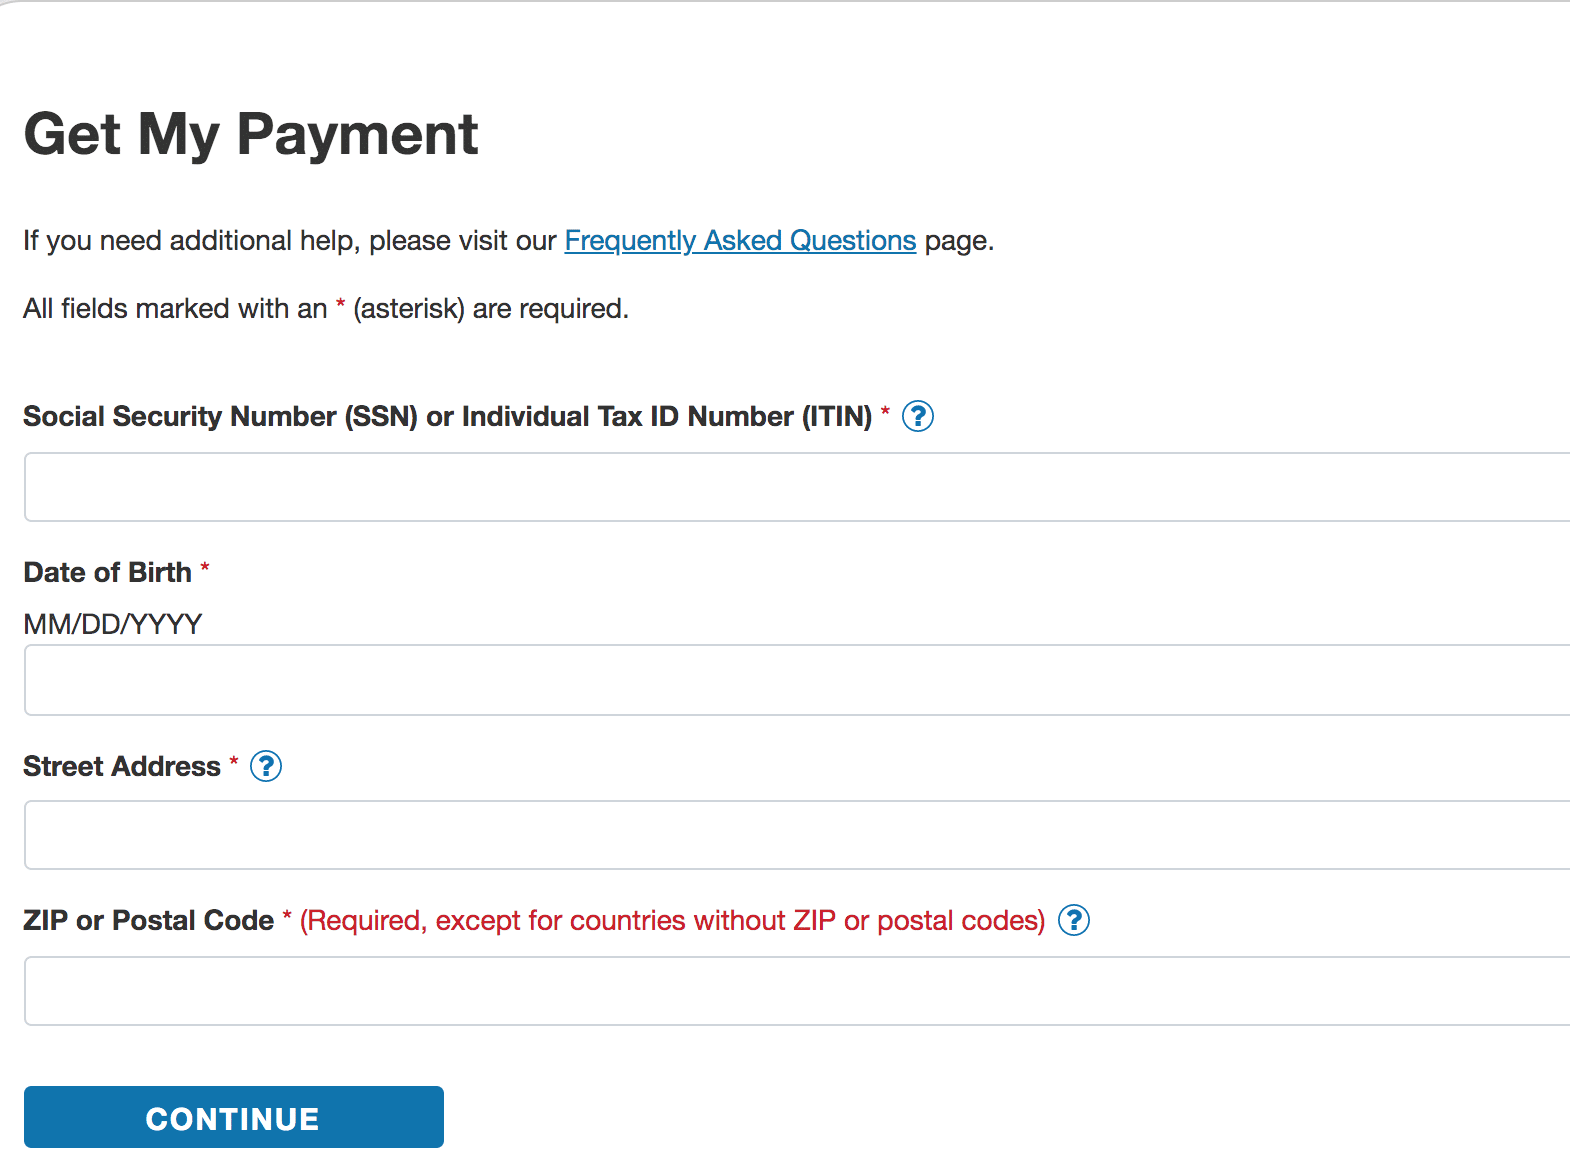 Get My Payment page from IRS